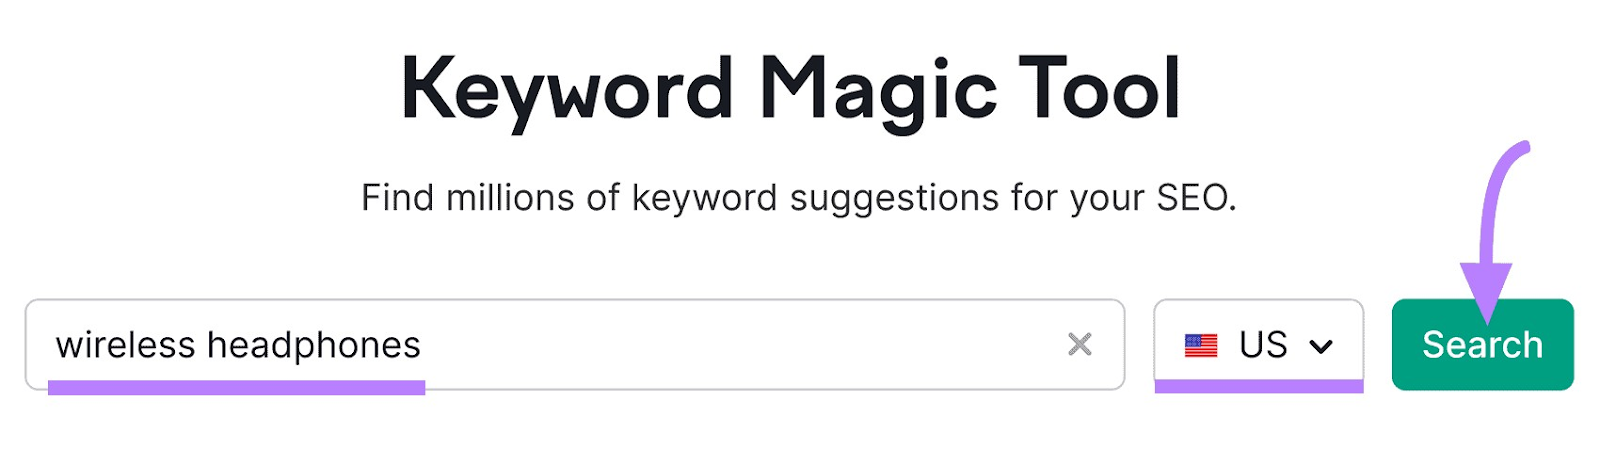 "wireless headphones" entered into the Keyword Magic Tool search bar